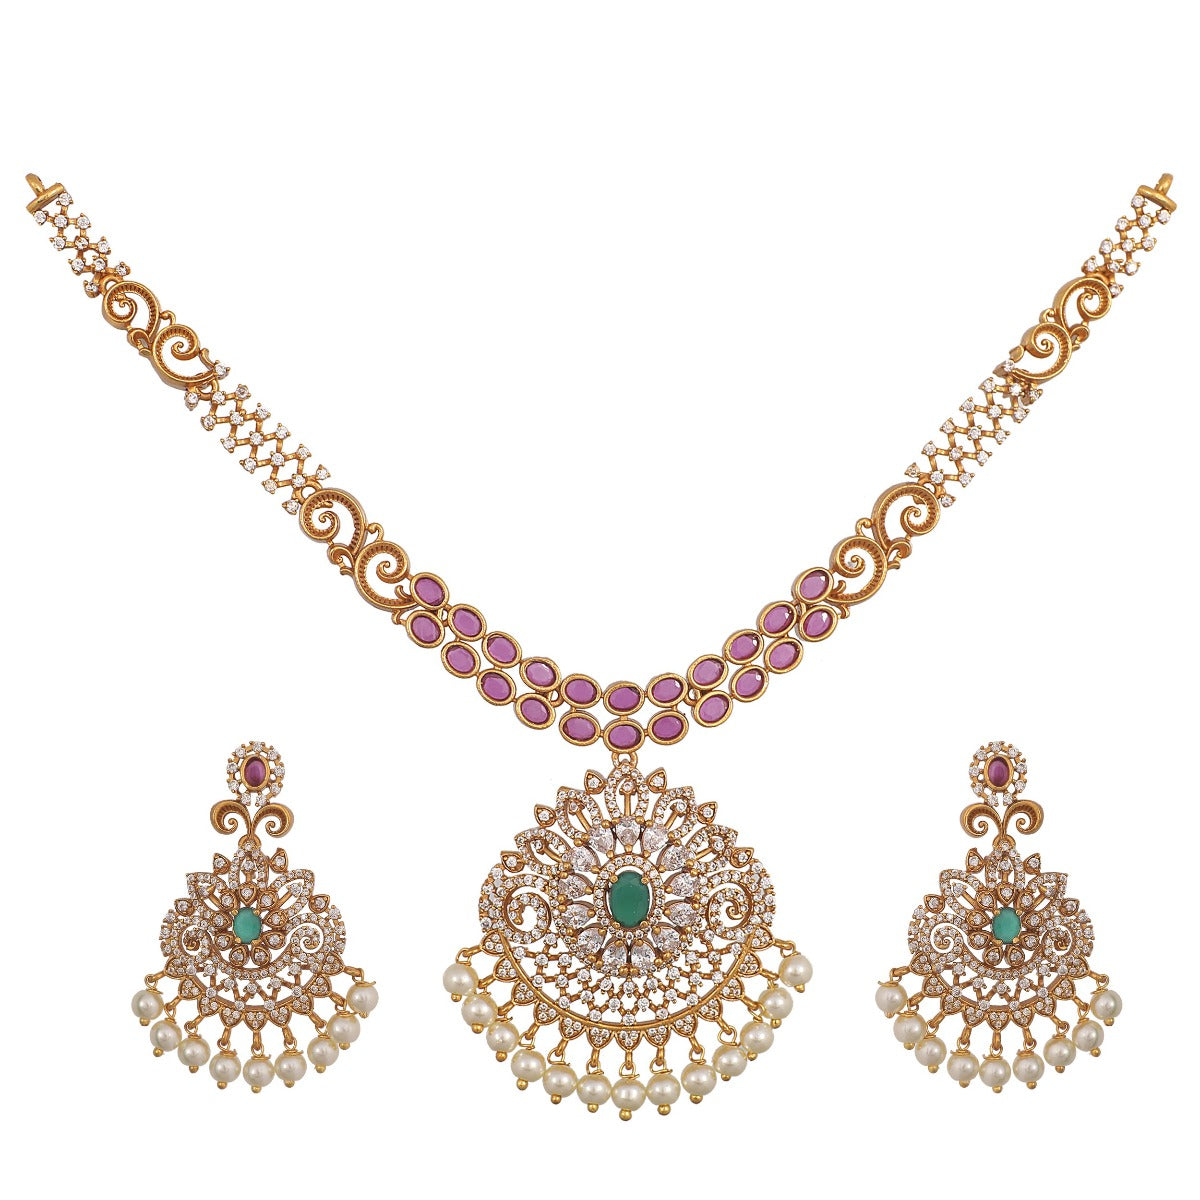 A picture of an Indian artificial necklace and earring set in gold tone, featuring intricate filigree work  with Cubic Zirconia and pearl embellishments, green gemstones.